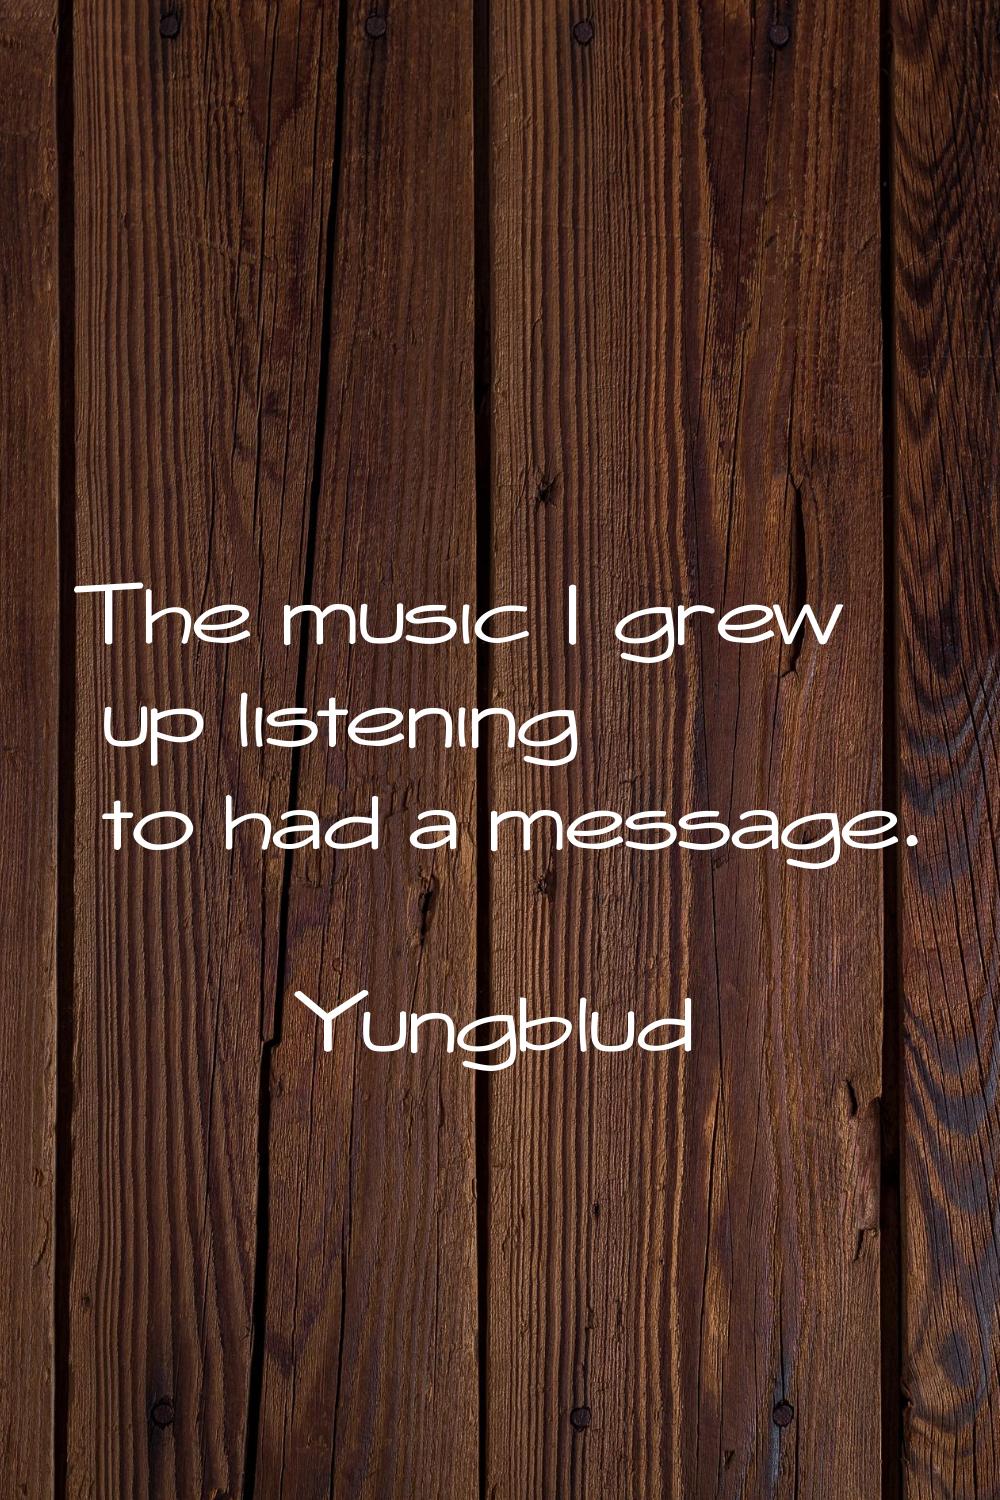 The music I grew up listening to had a message.